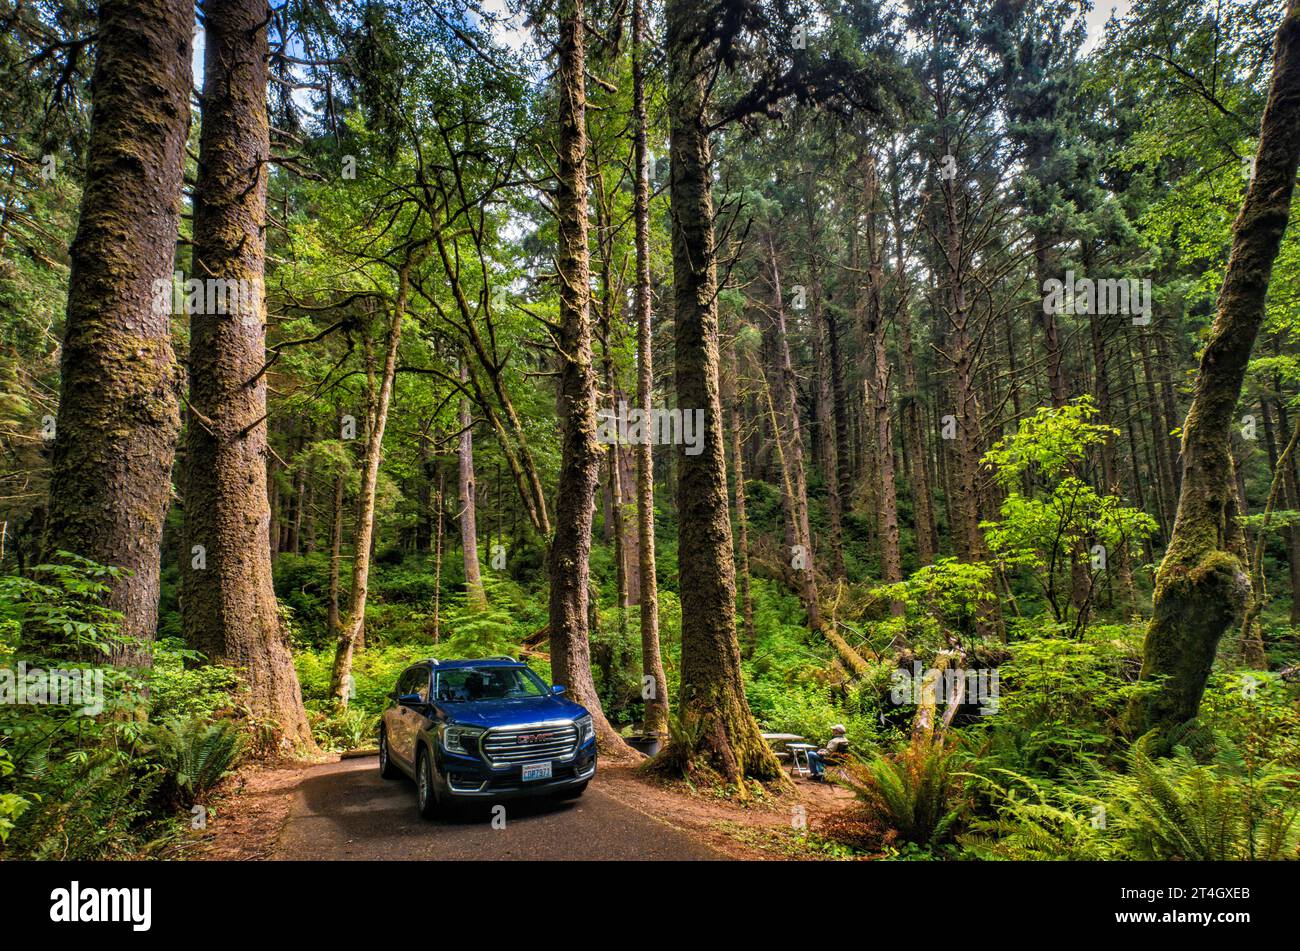 Vehicle and camper at campsite over Rock creek, temperate rain forest, Rock Creek Campground, Siuslaw National Forest, Oregon Coast Range, Oregon, USA Stock Photo